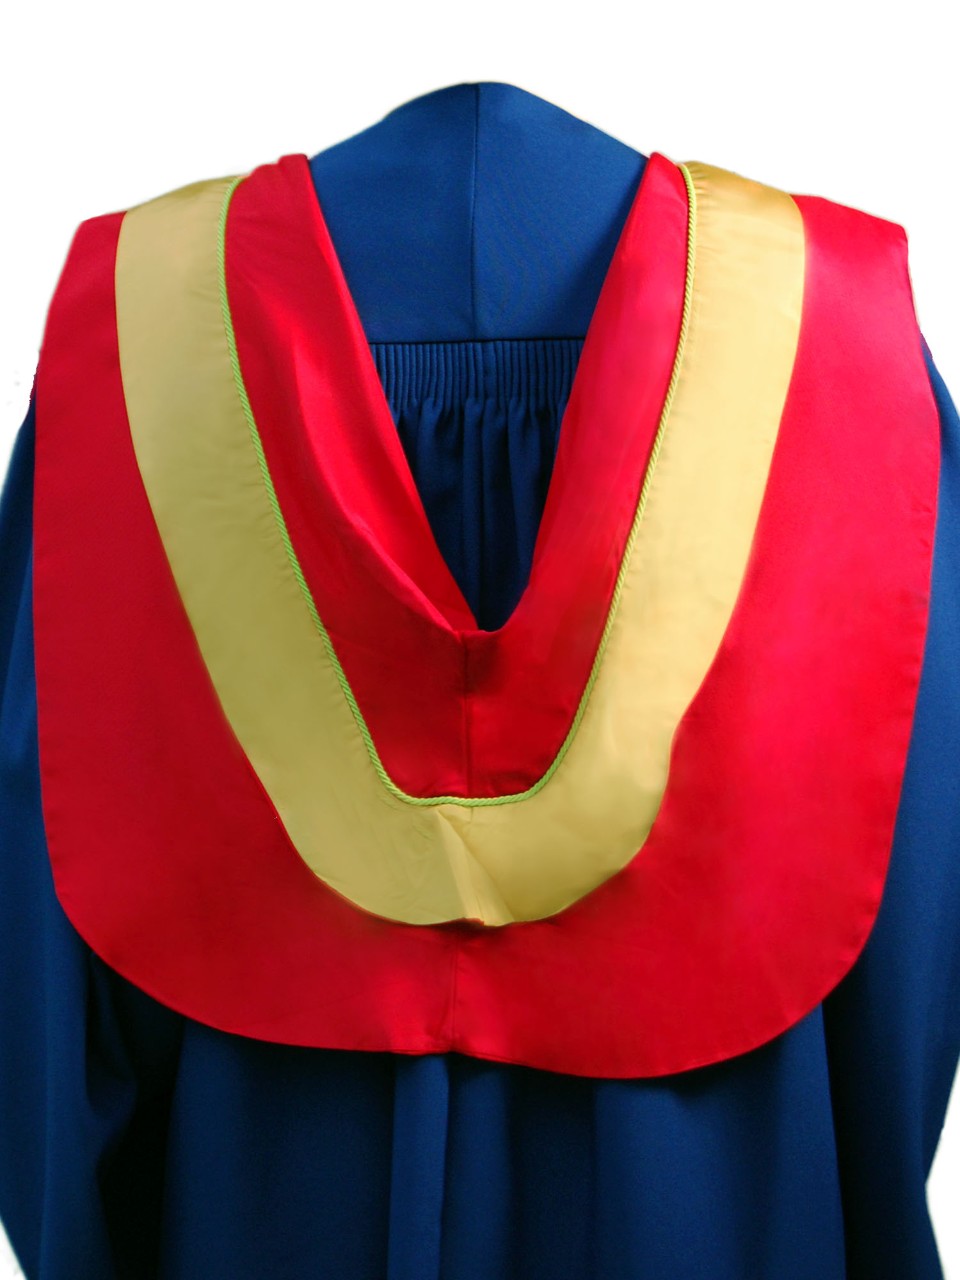 The Master of Pest Management hood is red with wide gold border and light green coding